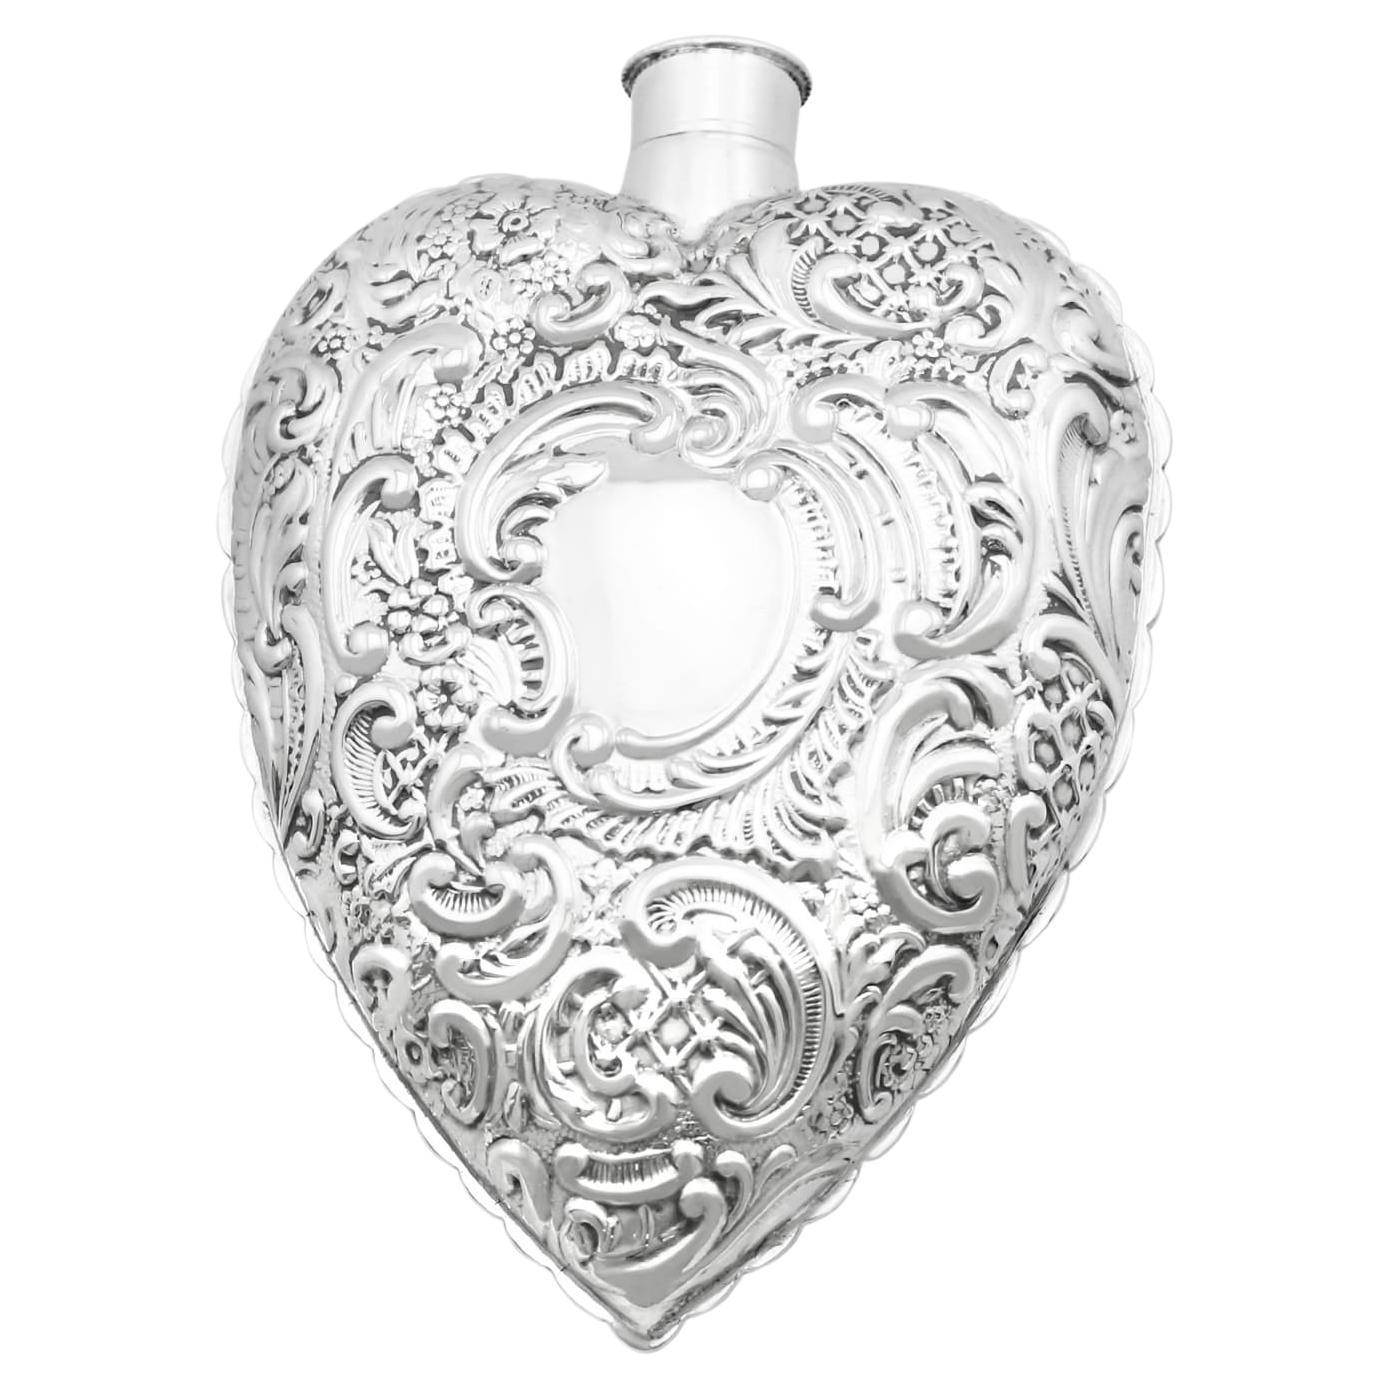 Antique Victorian Sterling Silver Heart Scent Flask